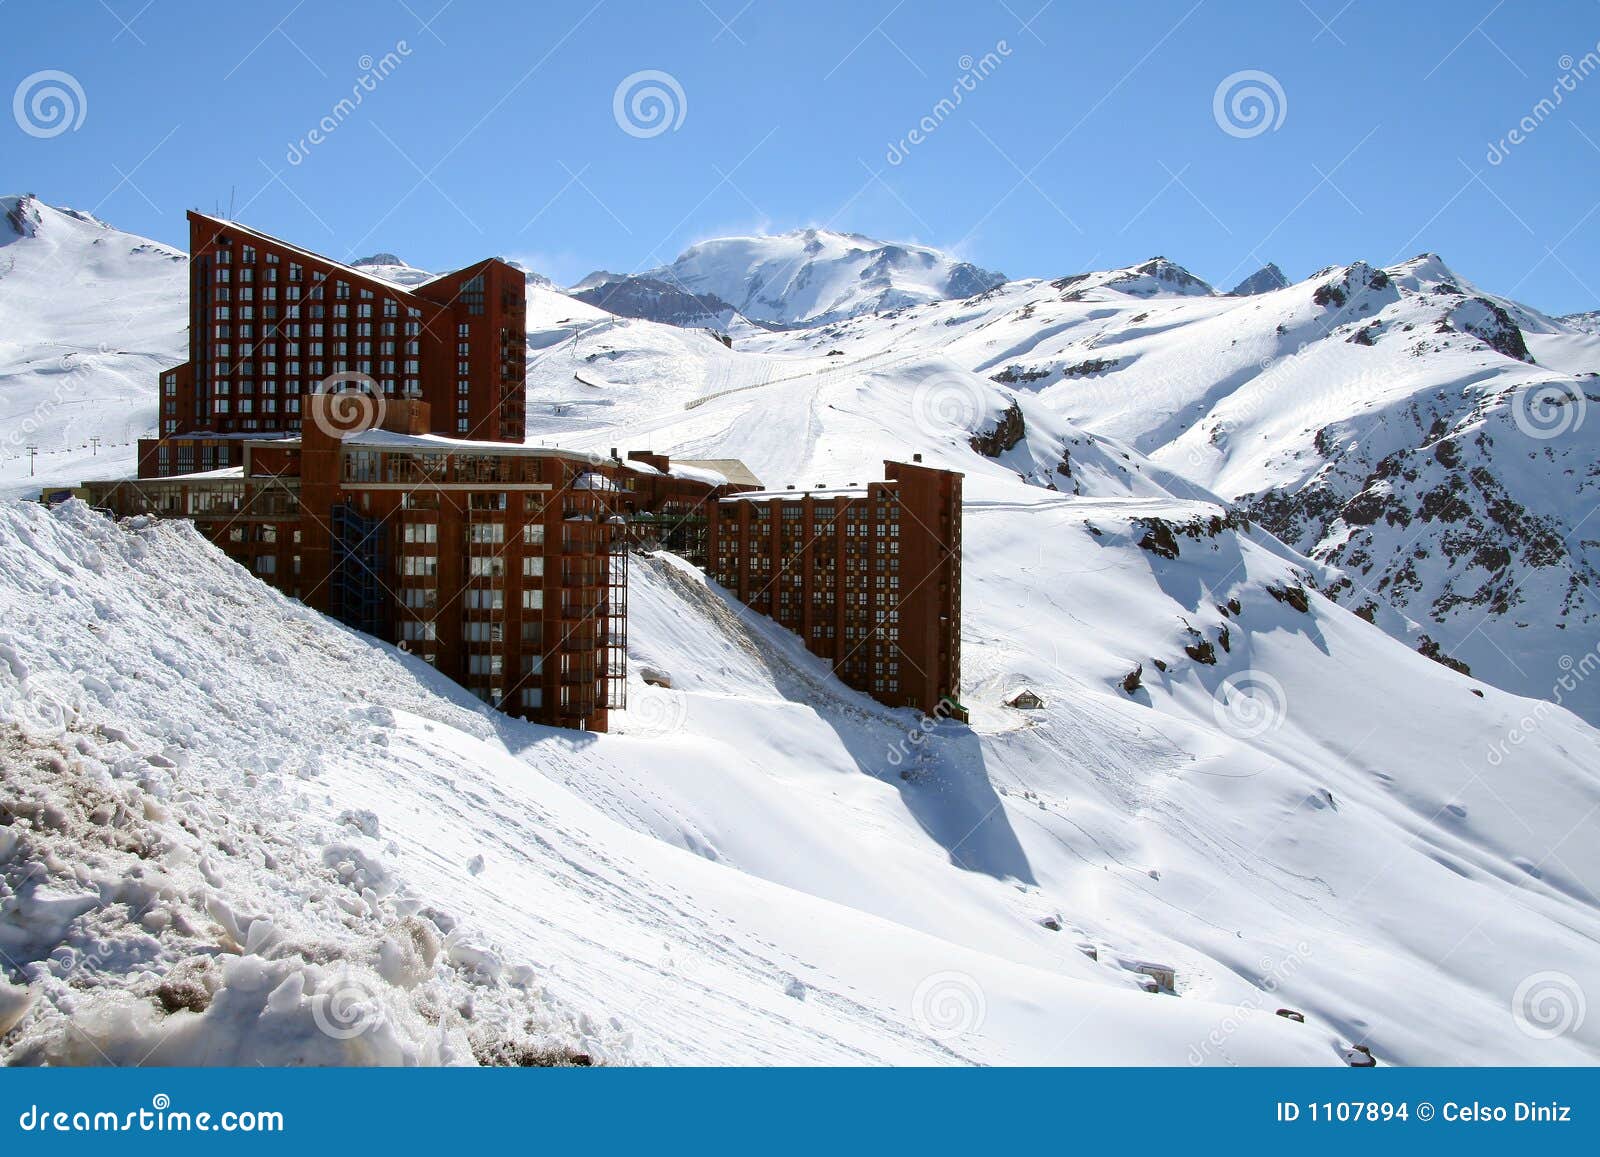 valle nevado in chile